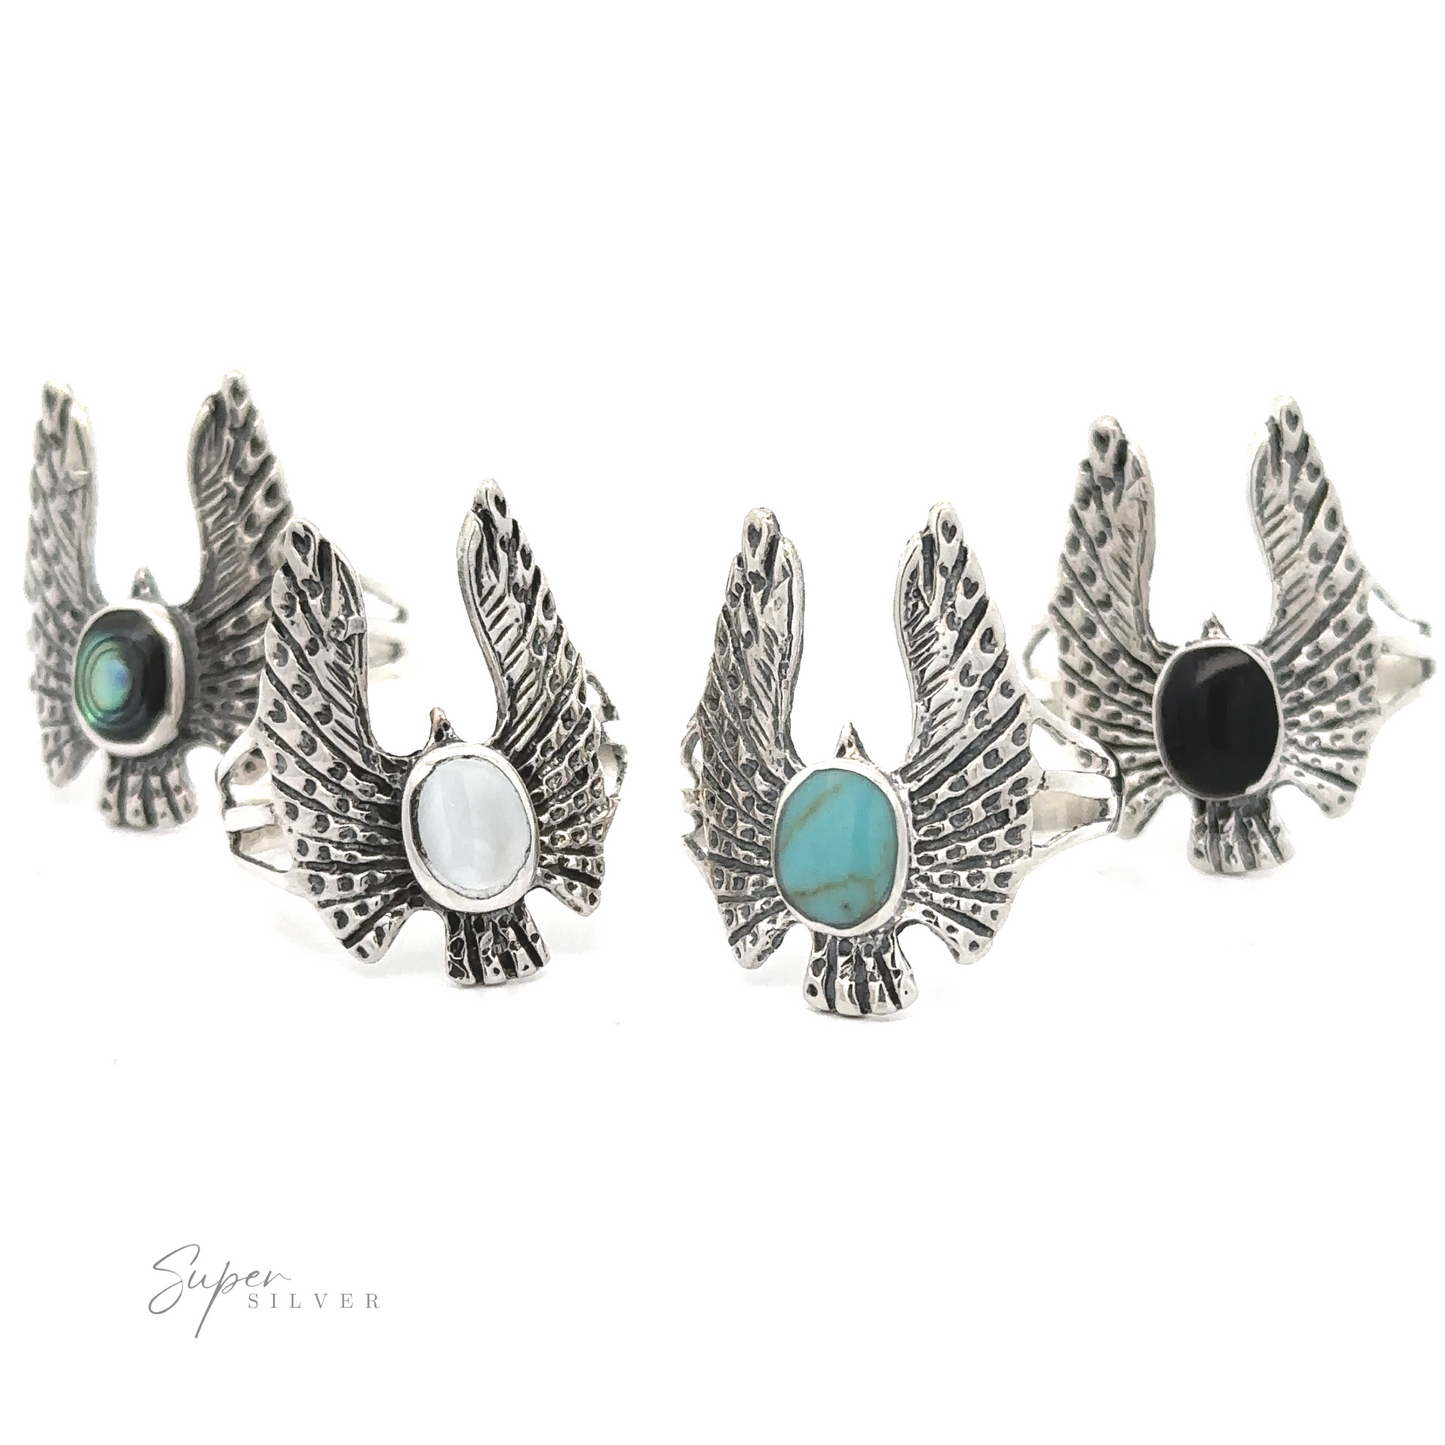 Four silver Inlaid Stone Rings with Eagle Wings displayed in a row, each with a different colored stone (green, white, turquoise, black) in the center.